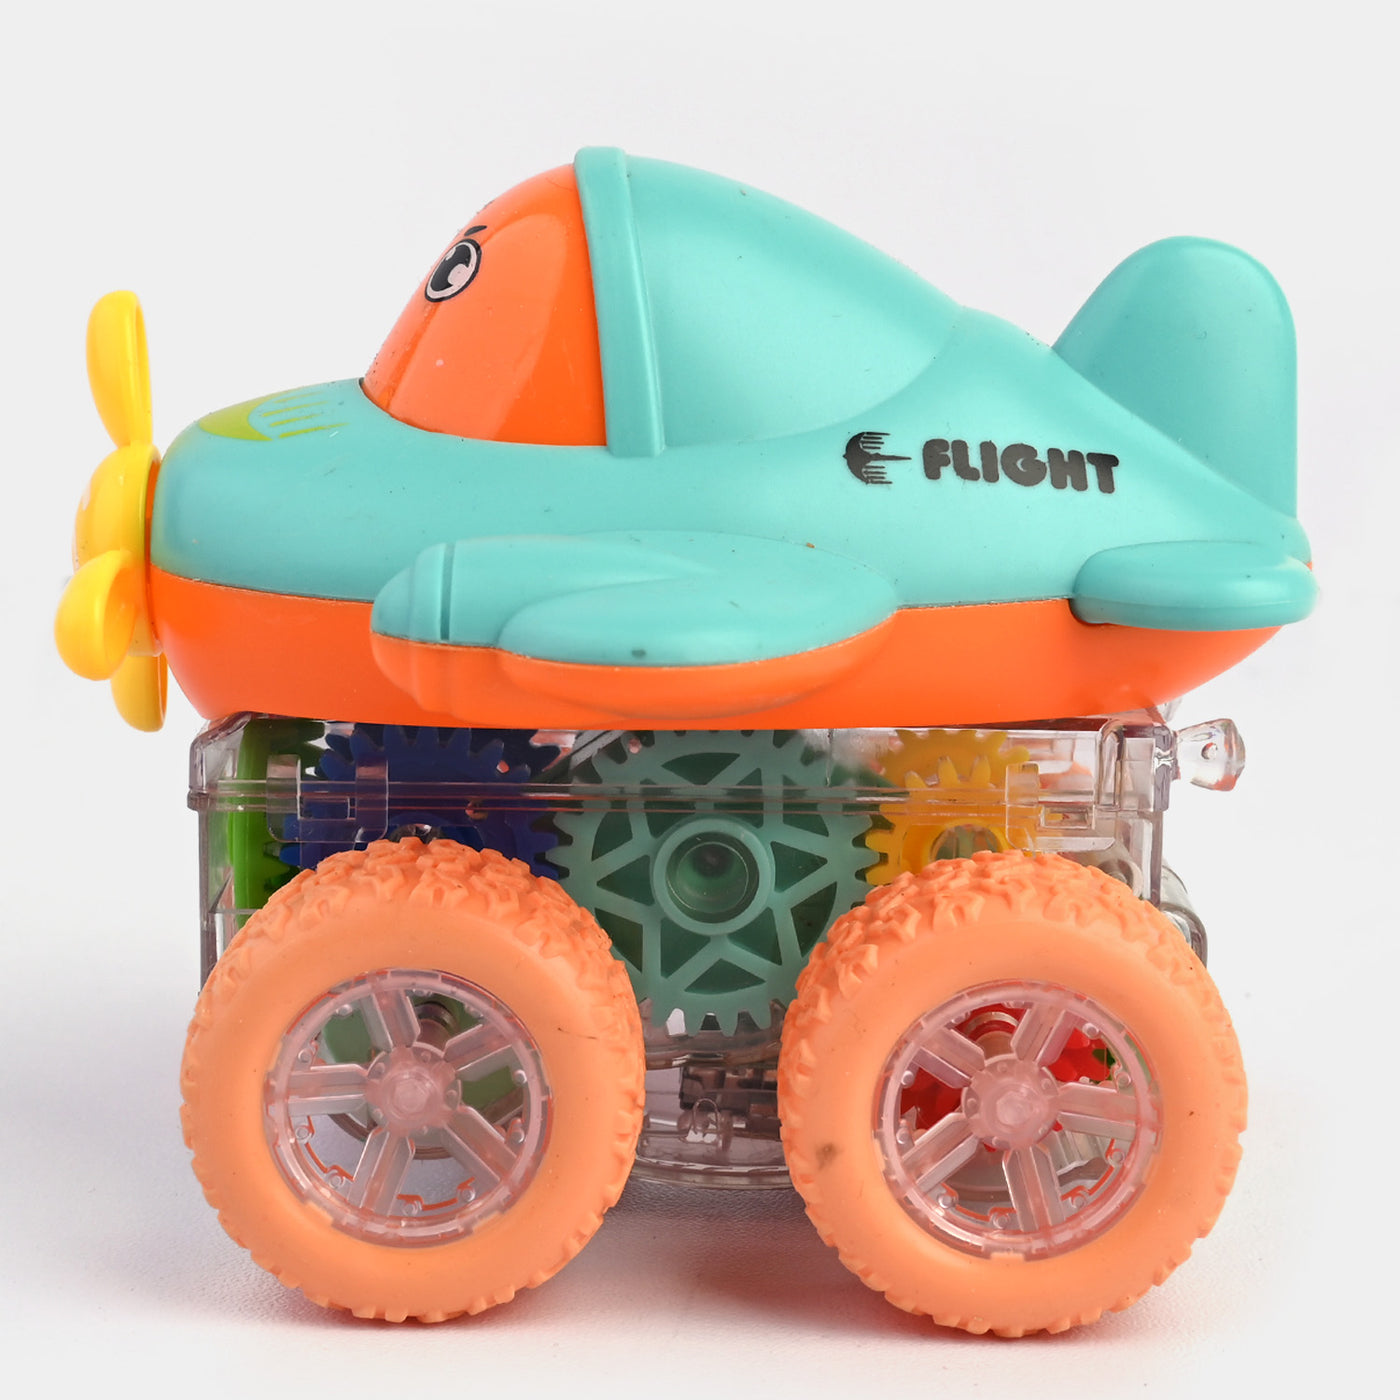 Kids Plastic Counter Toy